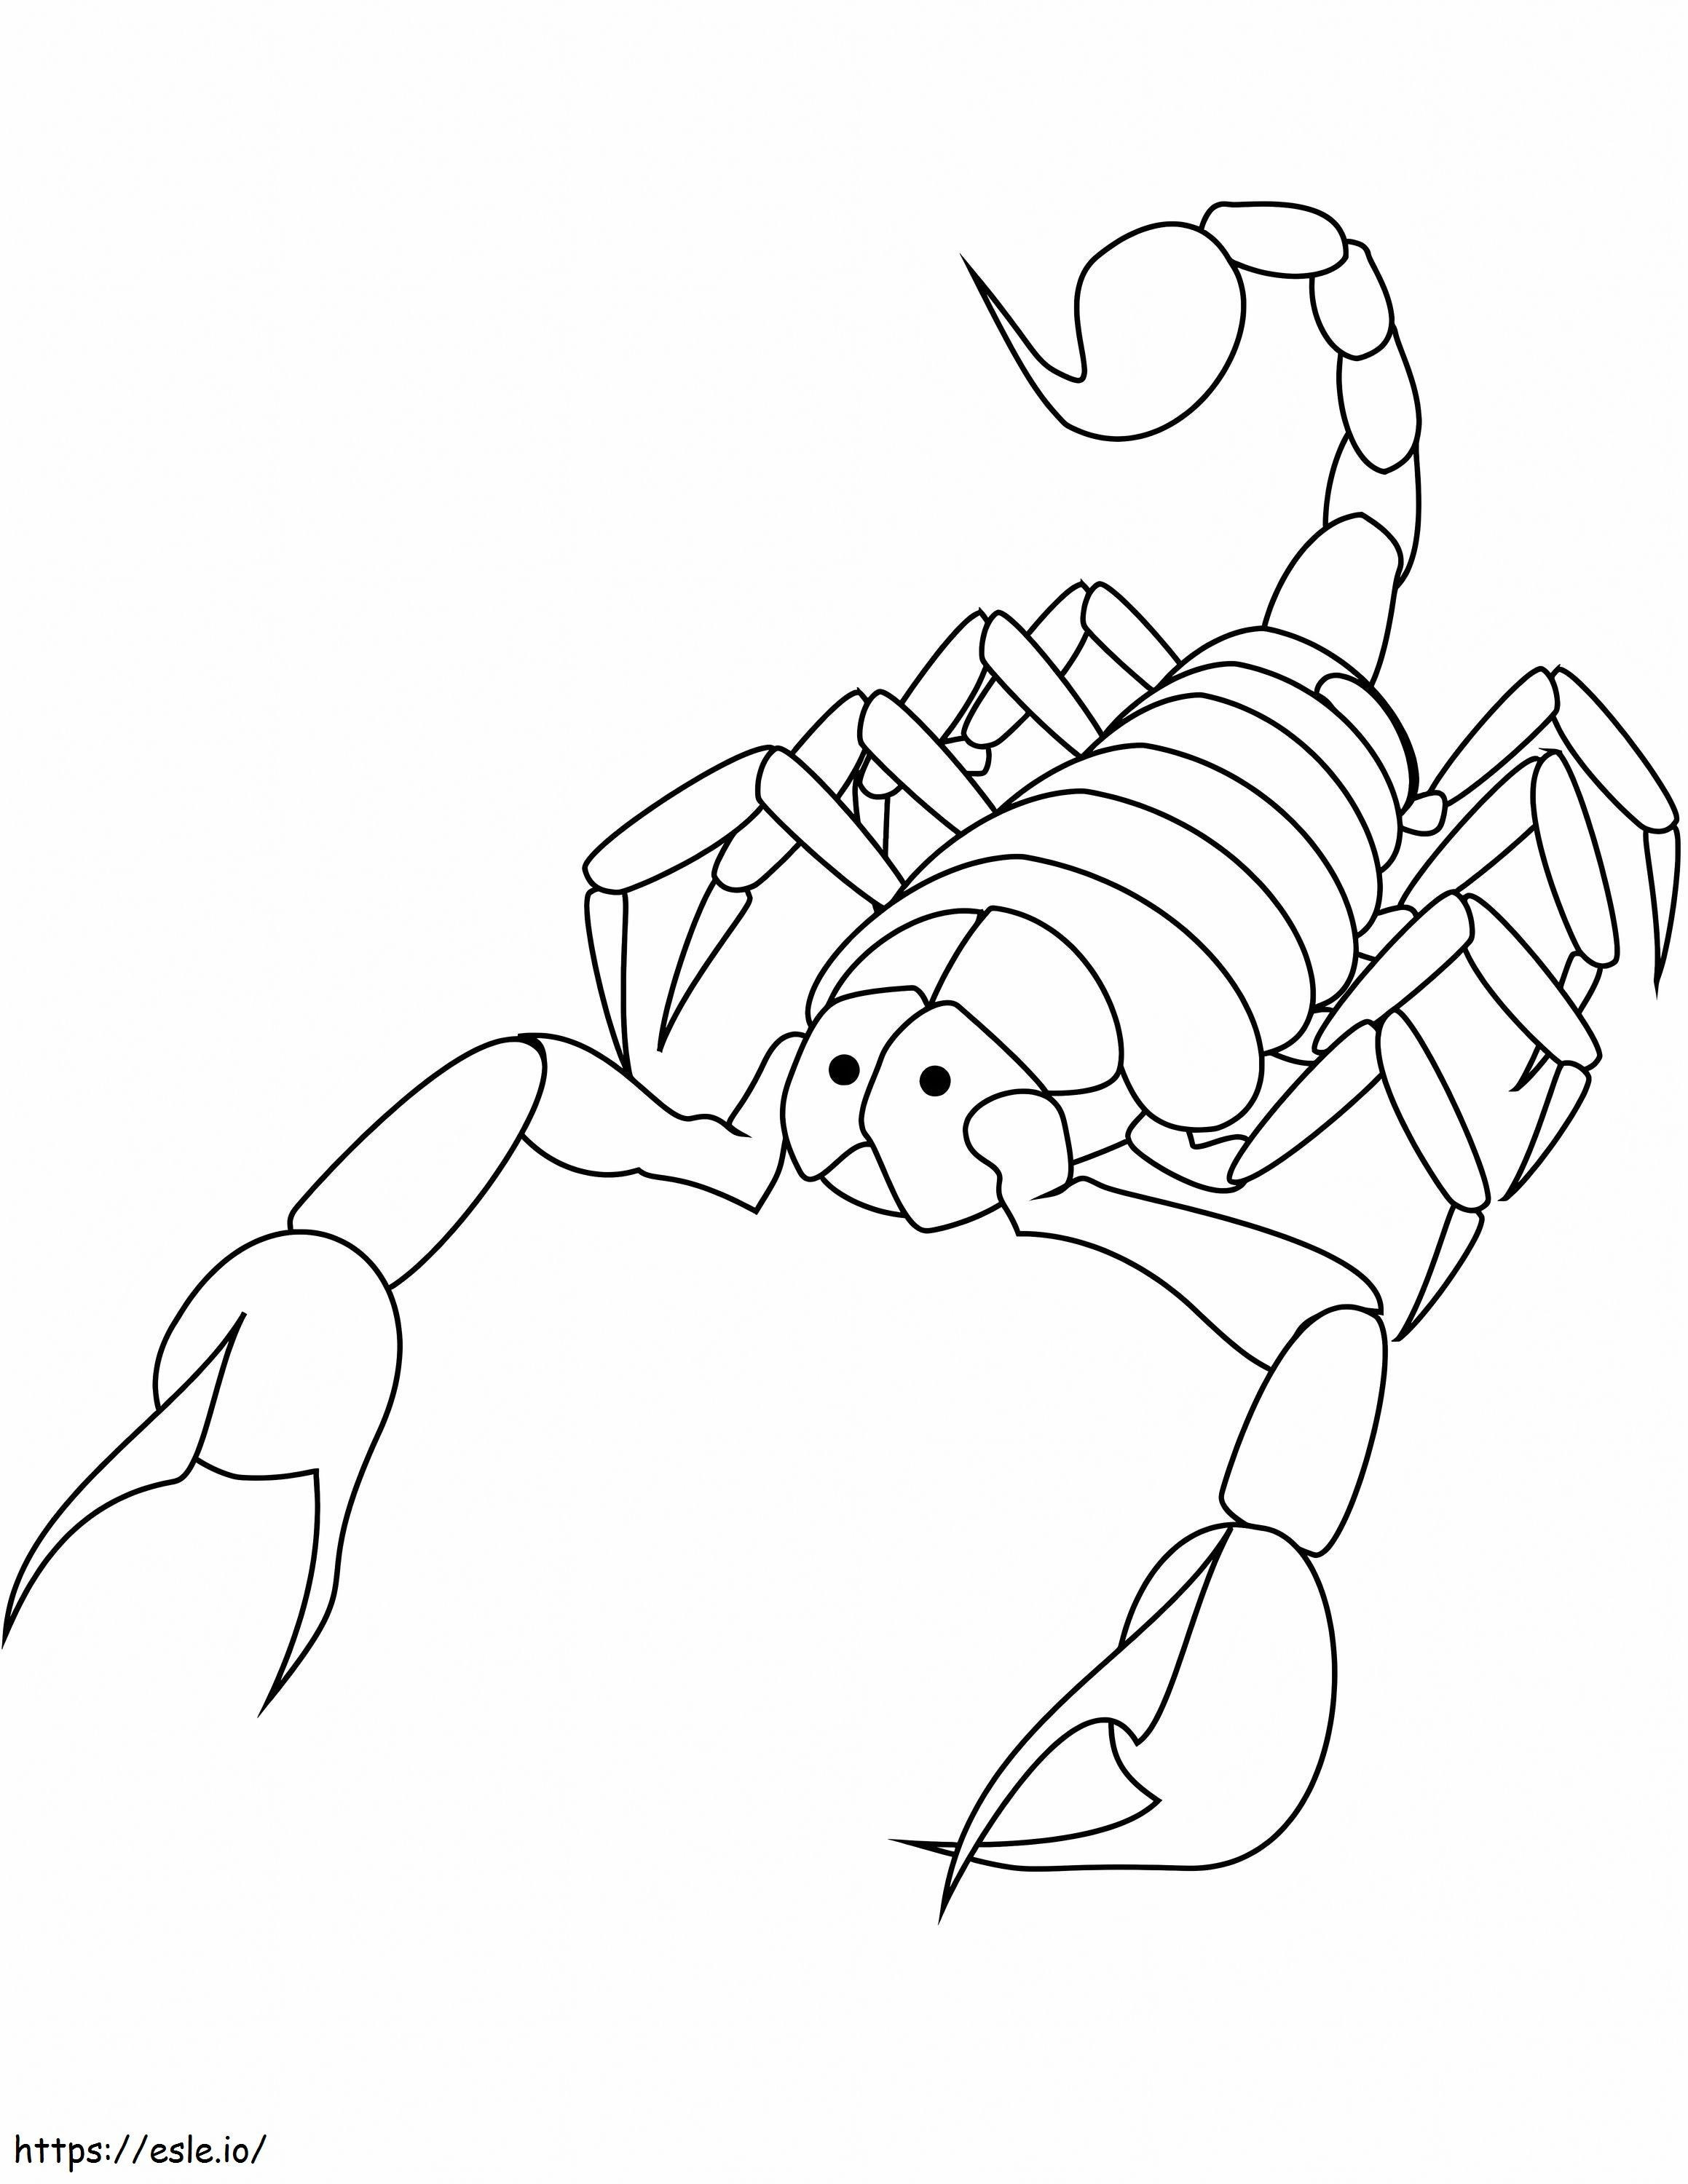 Print Scorpion coloring page